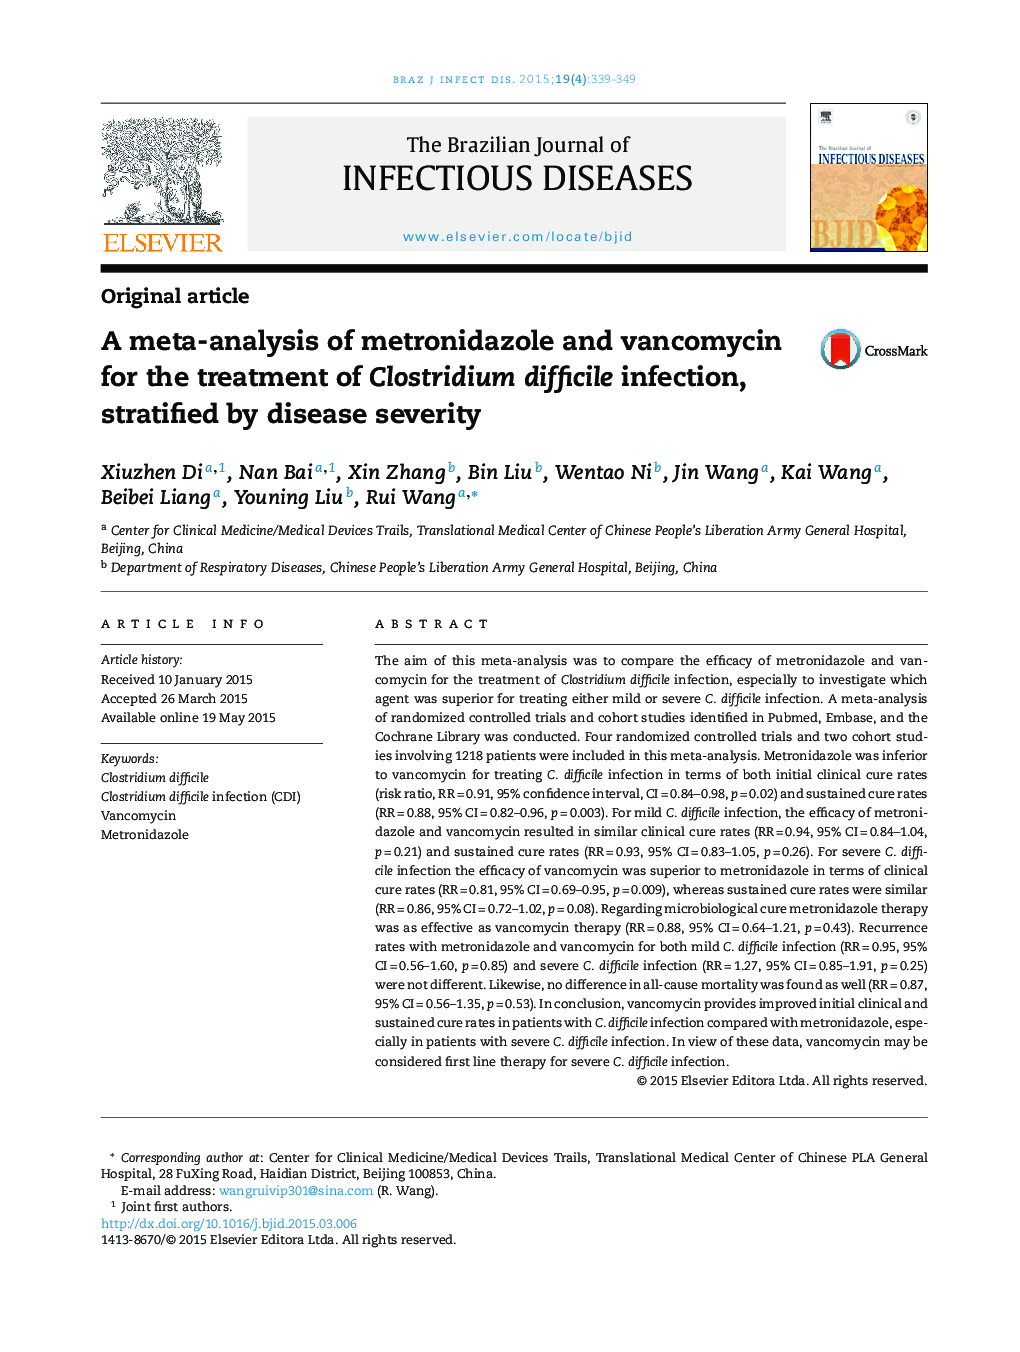 A meta-analysis of metronidazole and vancomycin for the treatment of Clostridium difficile infection, stratified by disease severity